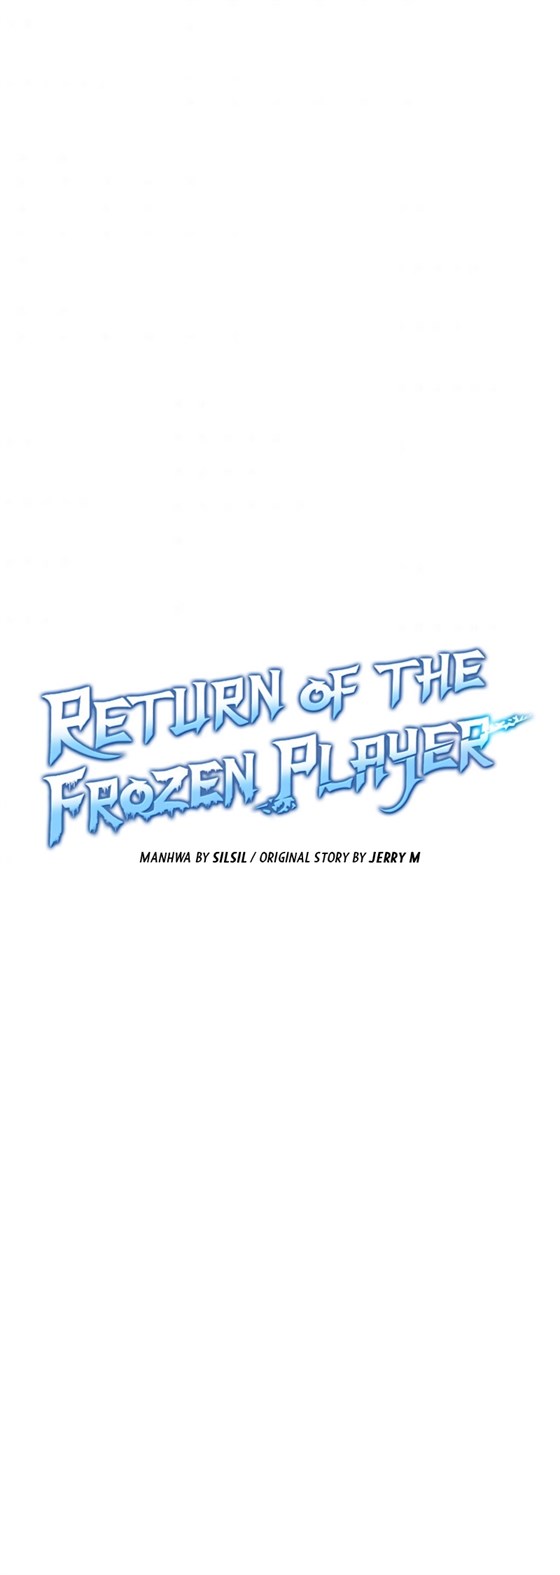 Return of the Frozen Player 38 04